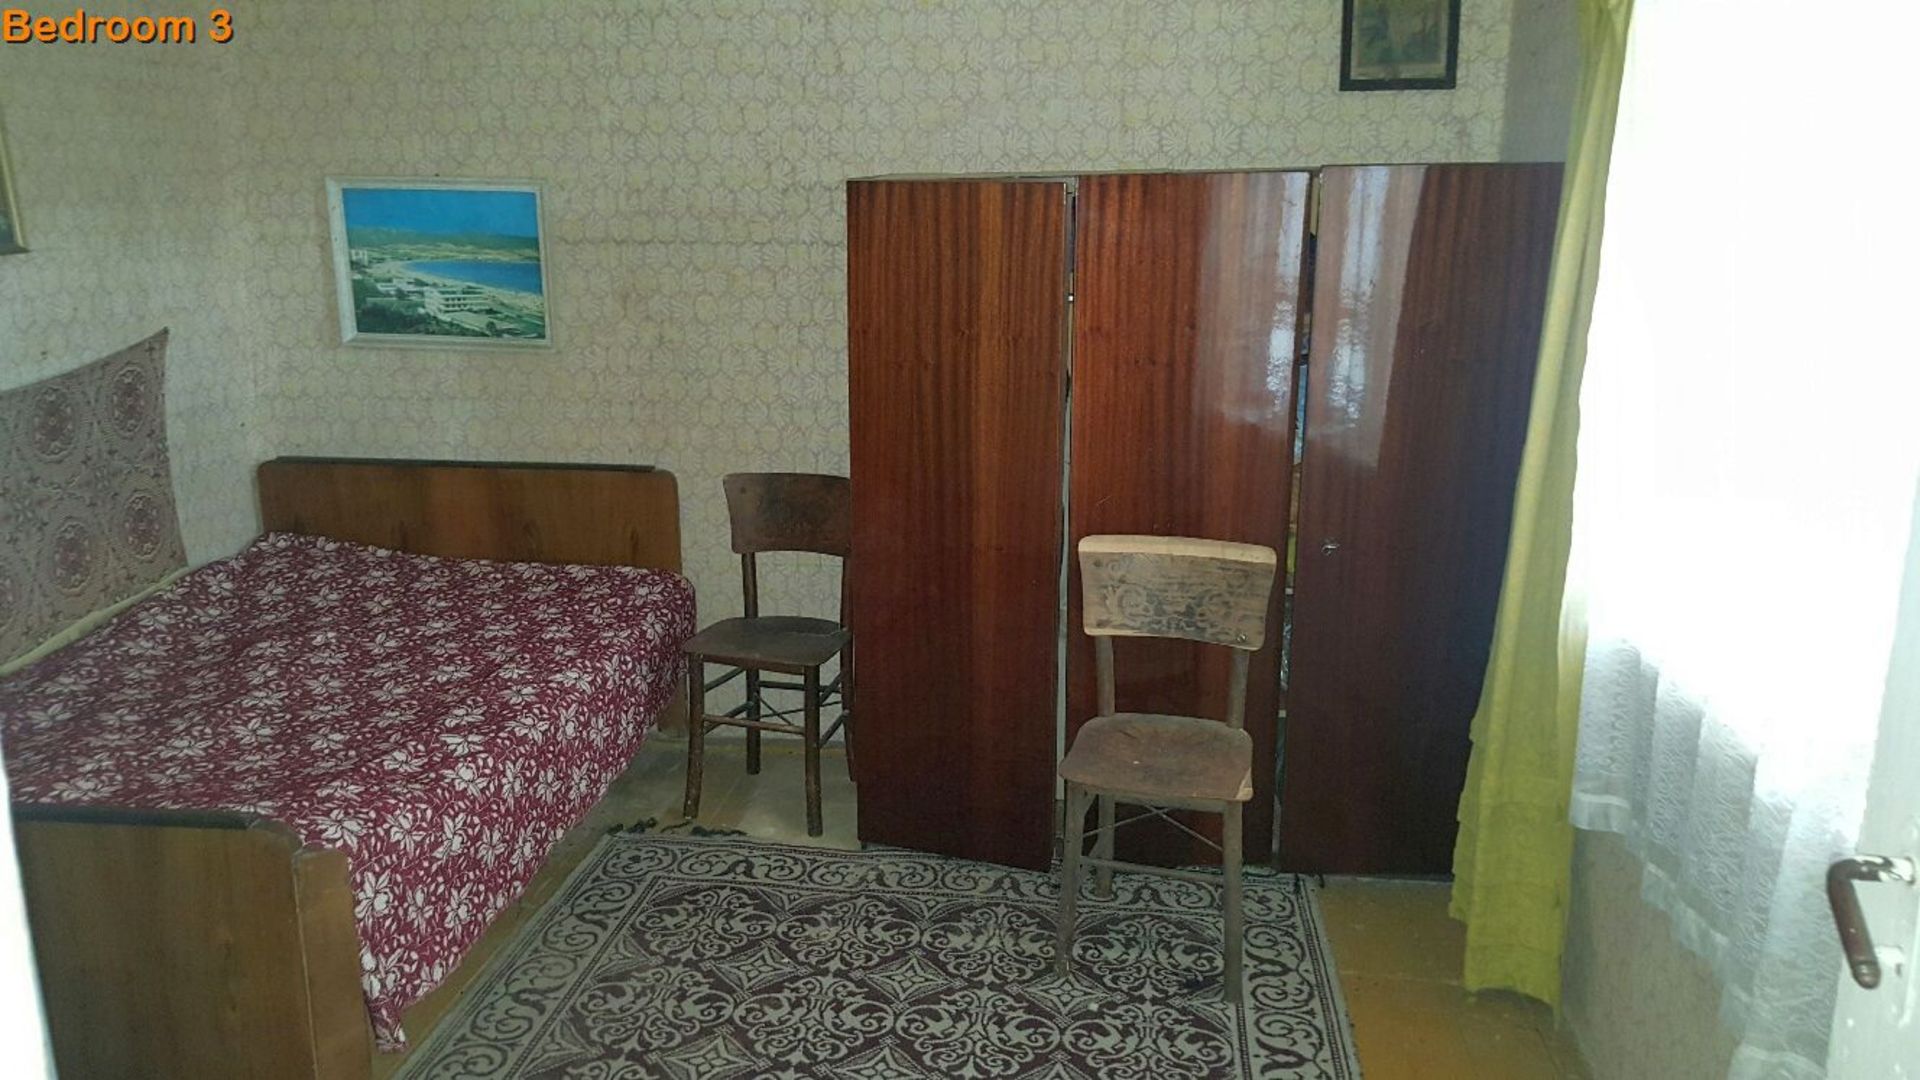 7 ROOM BULGARIAN COTTAGE IN IZVOROVO FOR SALE. WITH LAND NOT FAR FROM COAST - Image 12 of 41